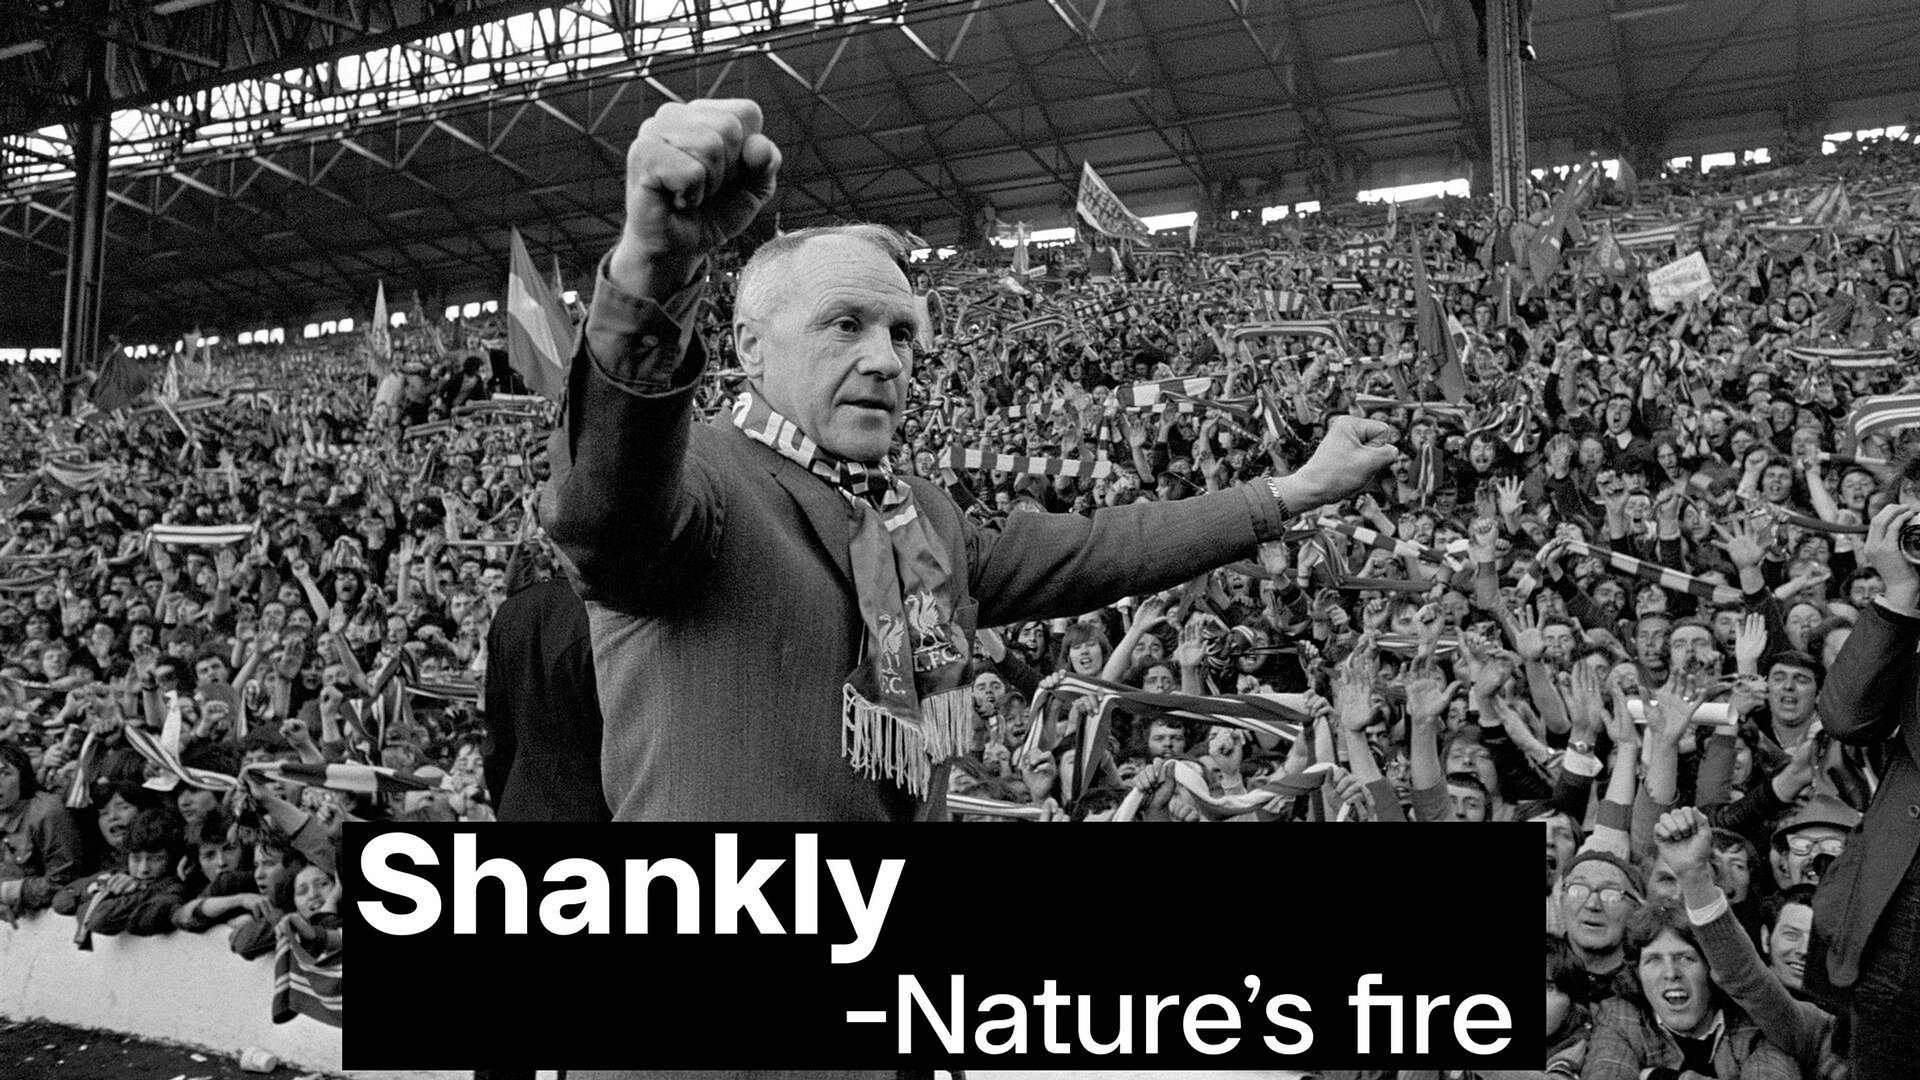 Shankly – Nature's fire